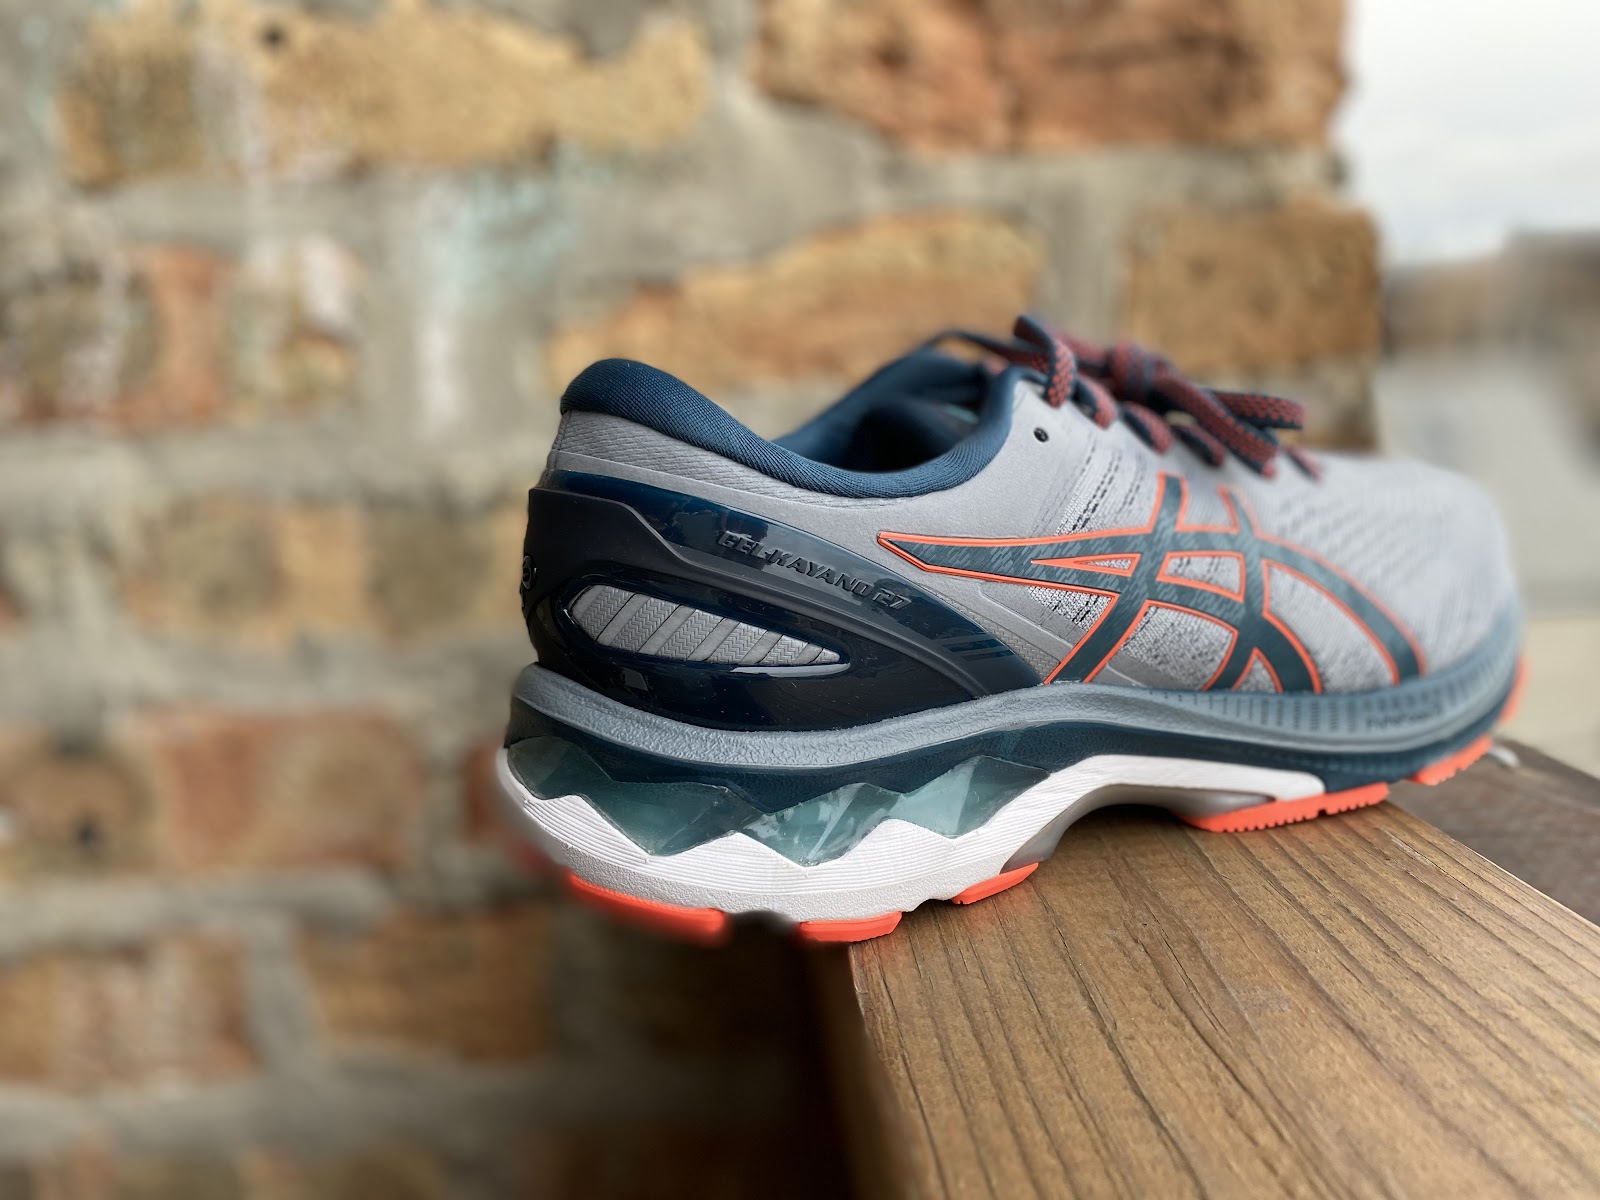 Road Trail Run Asics Gel Kayano 27 Review A Refined Smooth Running Adaptive Approach To Stability For Pronators And Neutrals